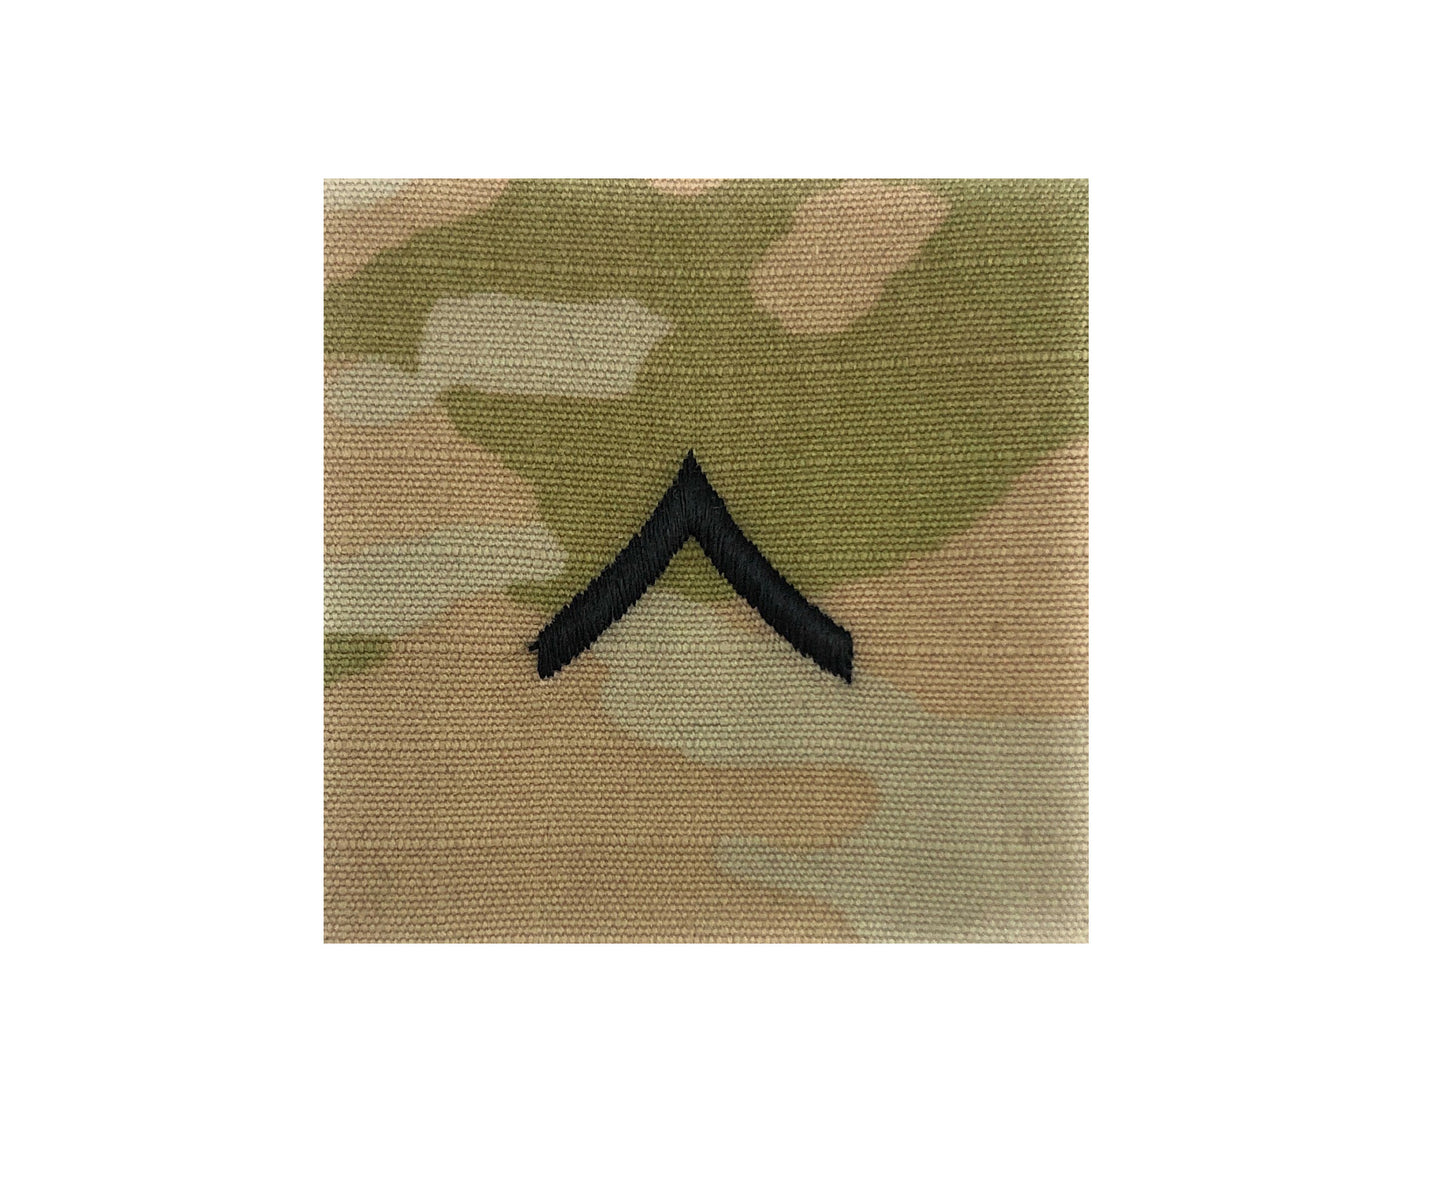 U.S. Army E2 Private OCP 2x2 Sew-On Rank For Shirt,Jacket,Coat